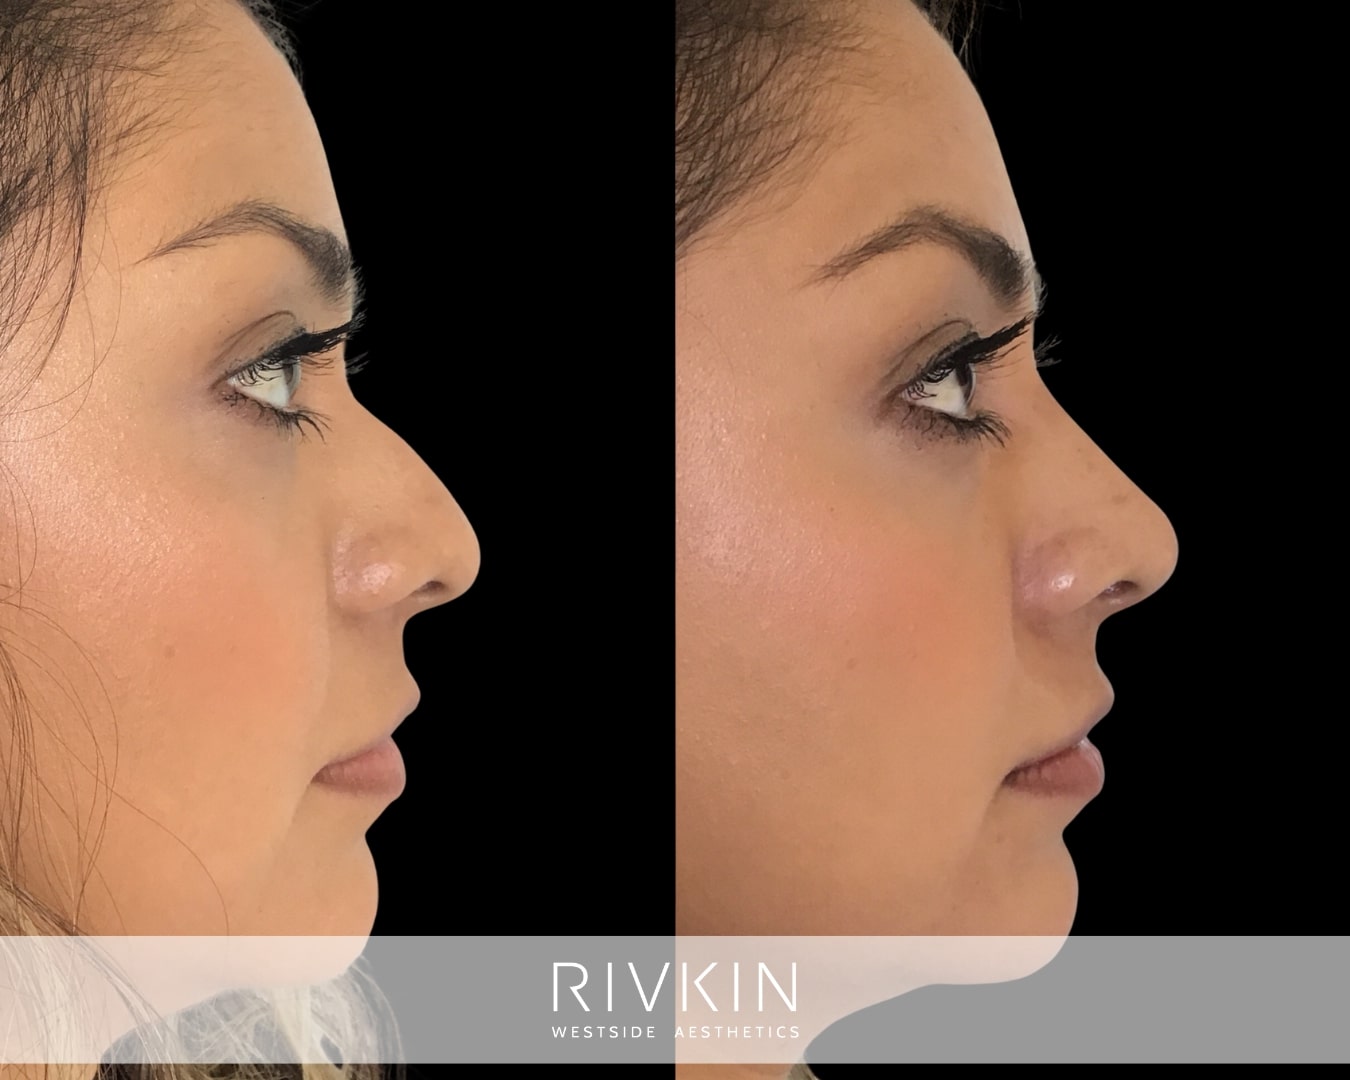 A nose that droops down at the tip gives the illusion of a nose that's larger than it actually is. By projecting the tip forward, and camouflaging the small bump on the bridge, Dr. Rivkin made her nose look smaller and in better harmony with the rest of her face.